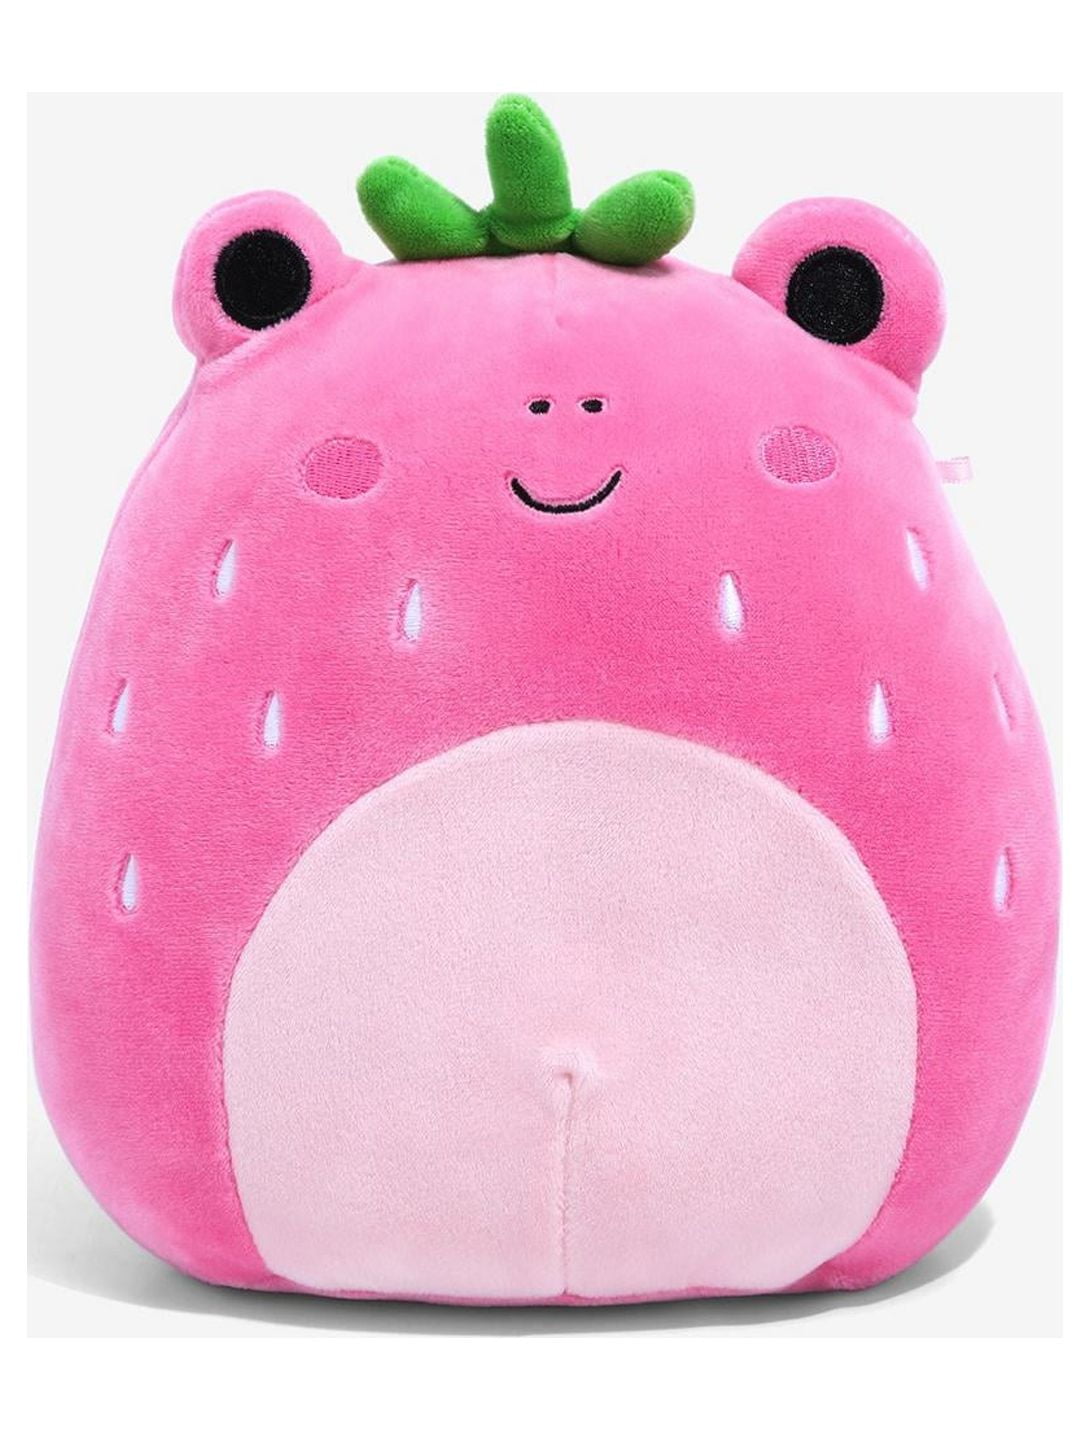 Squishmallows Adabelle the Strawberry Frog 8 Inch Plush - Original Kellytoy